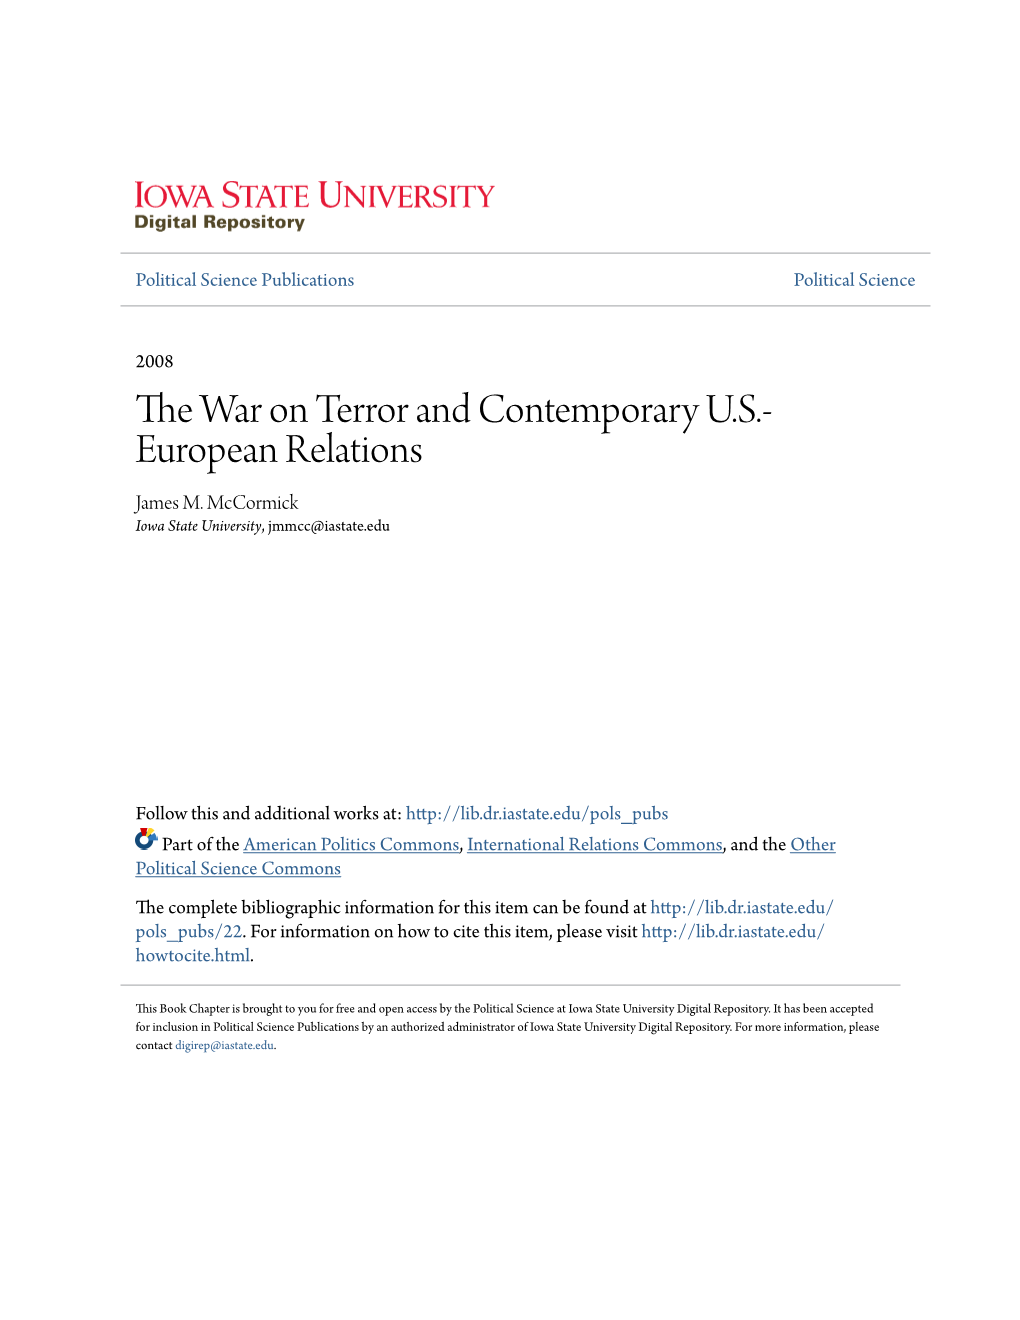 The War on Terror and Contemporary U.S.-European Relations